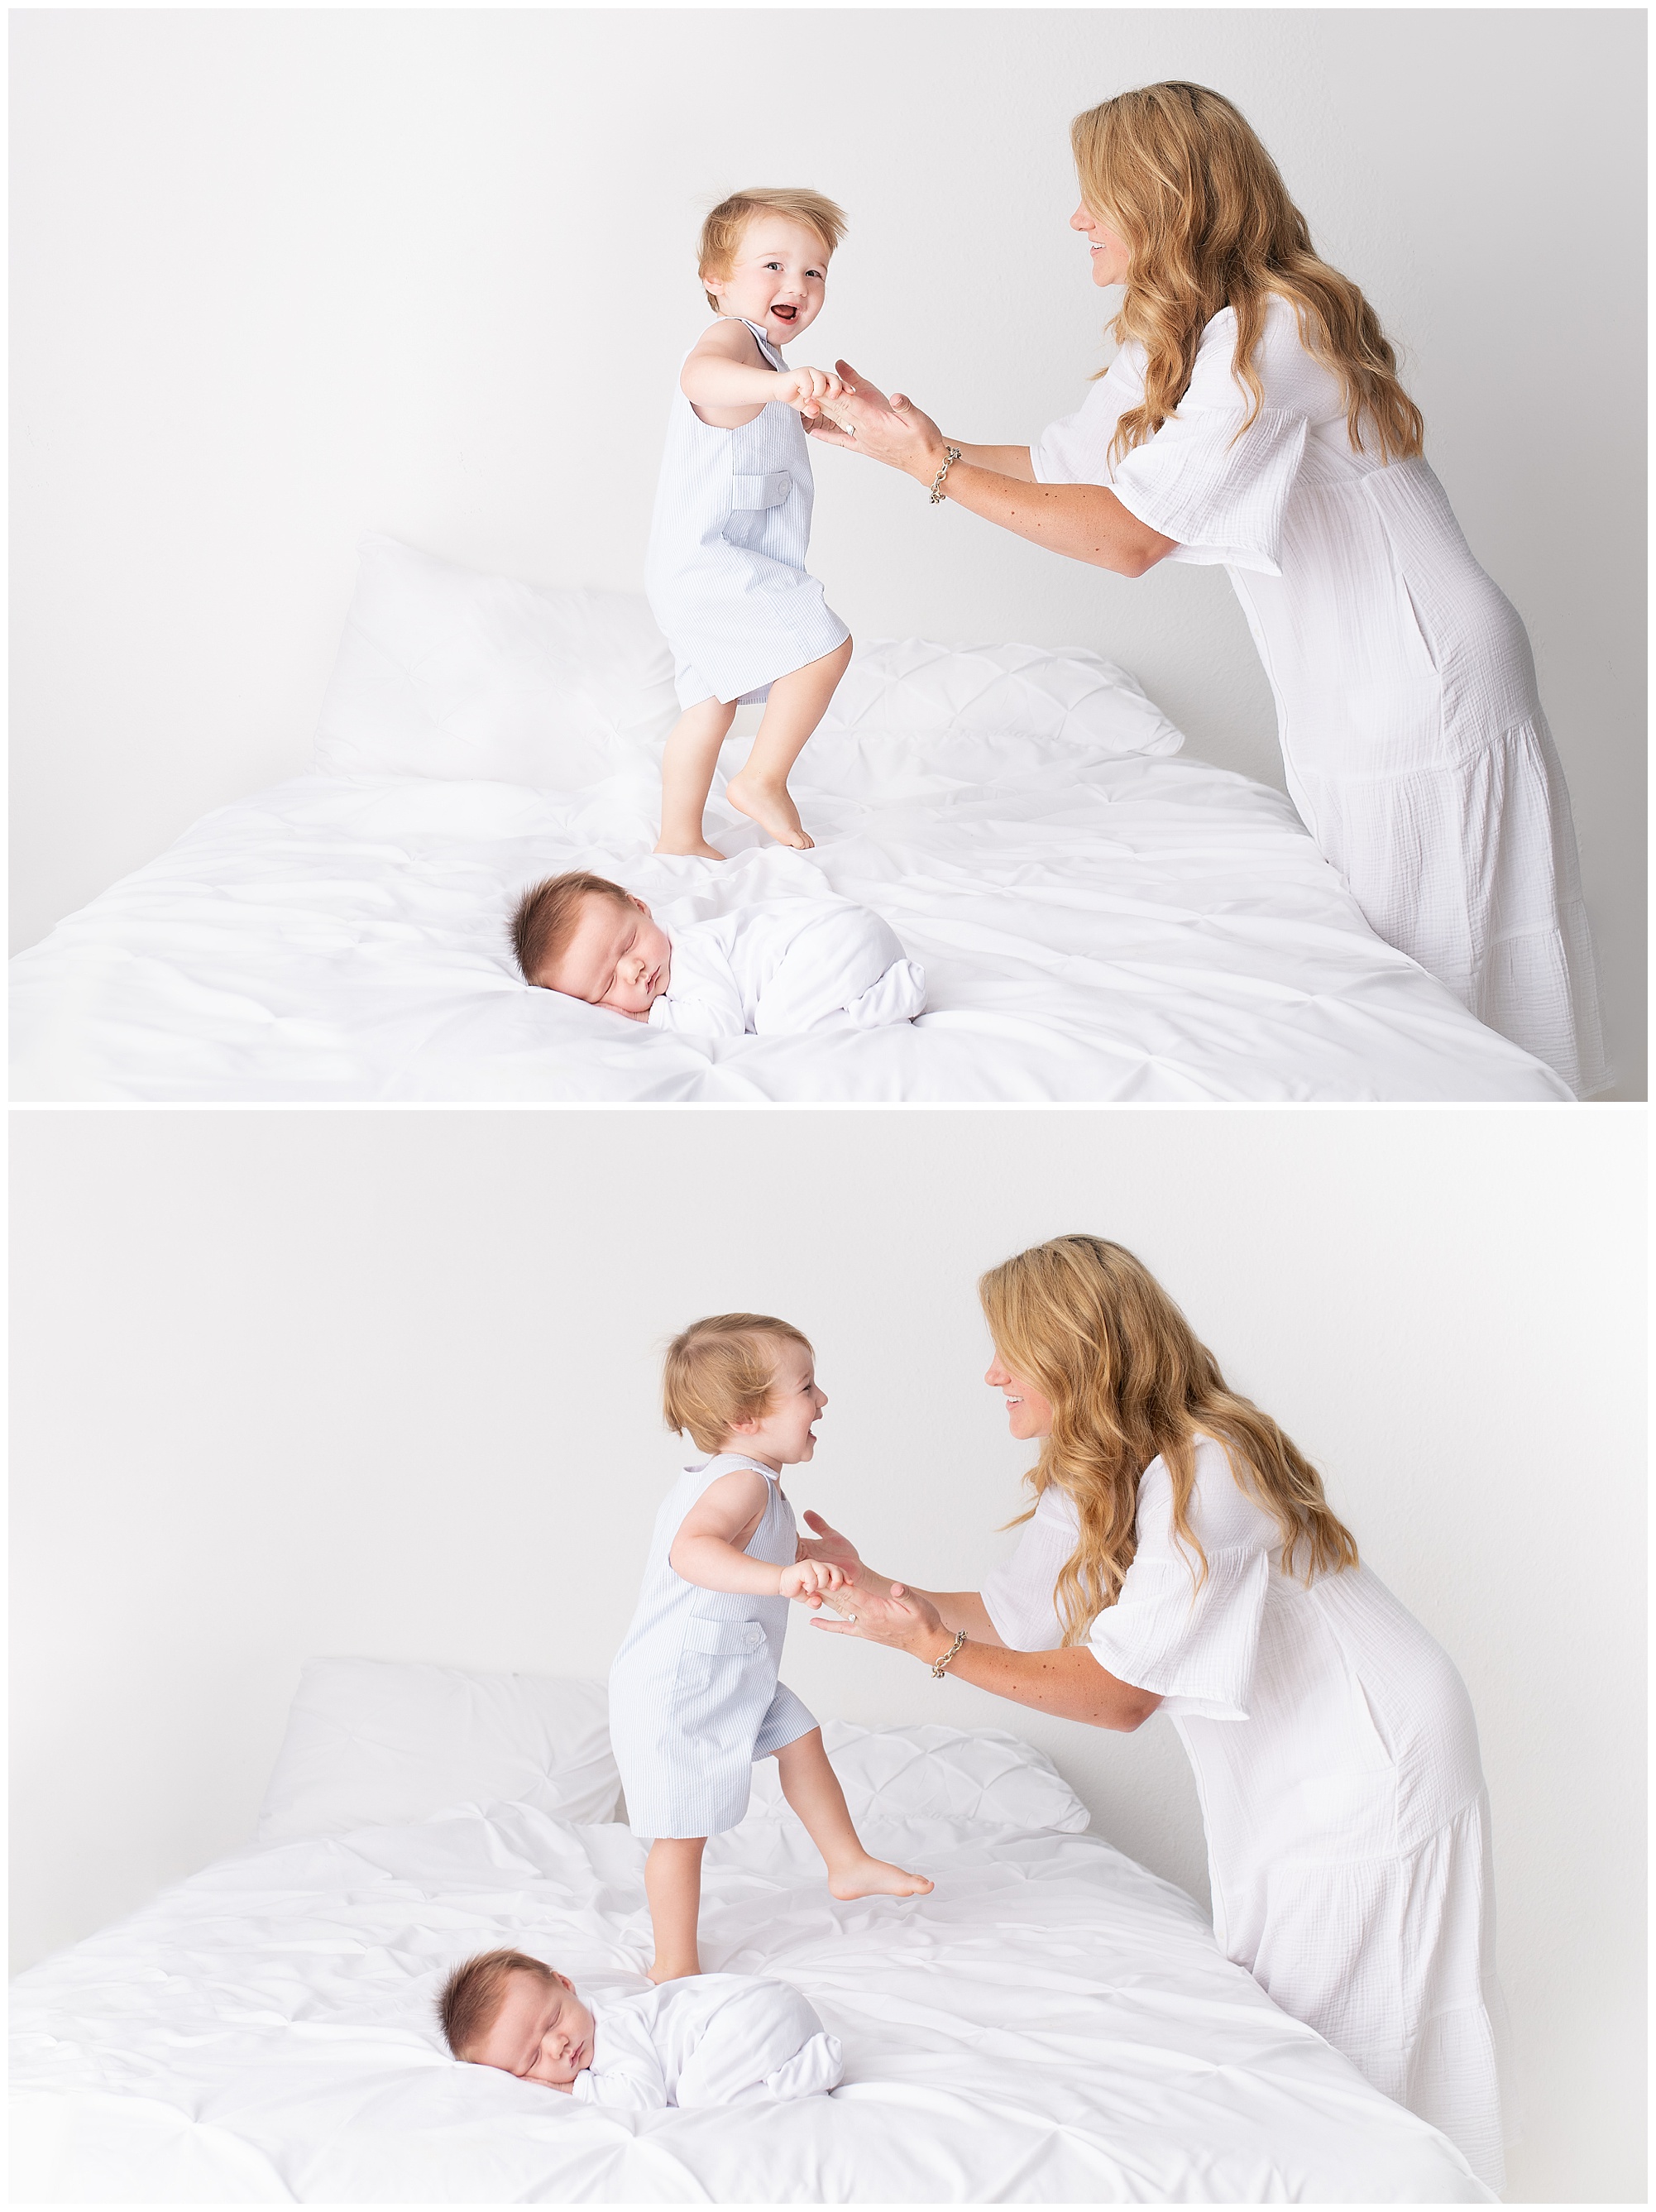 typical life with a toddler and a newborn baby in the studio for newborn photos